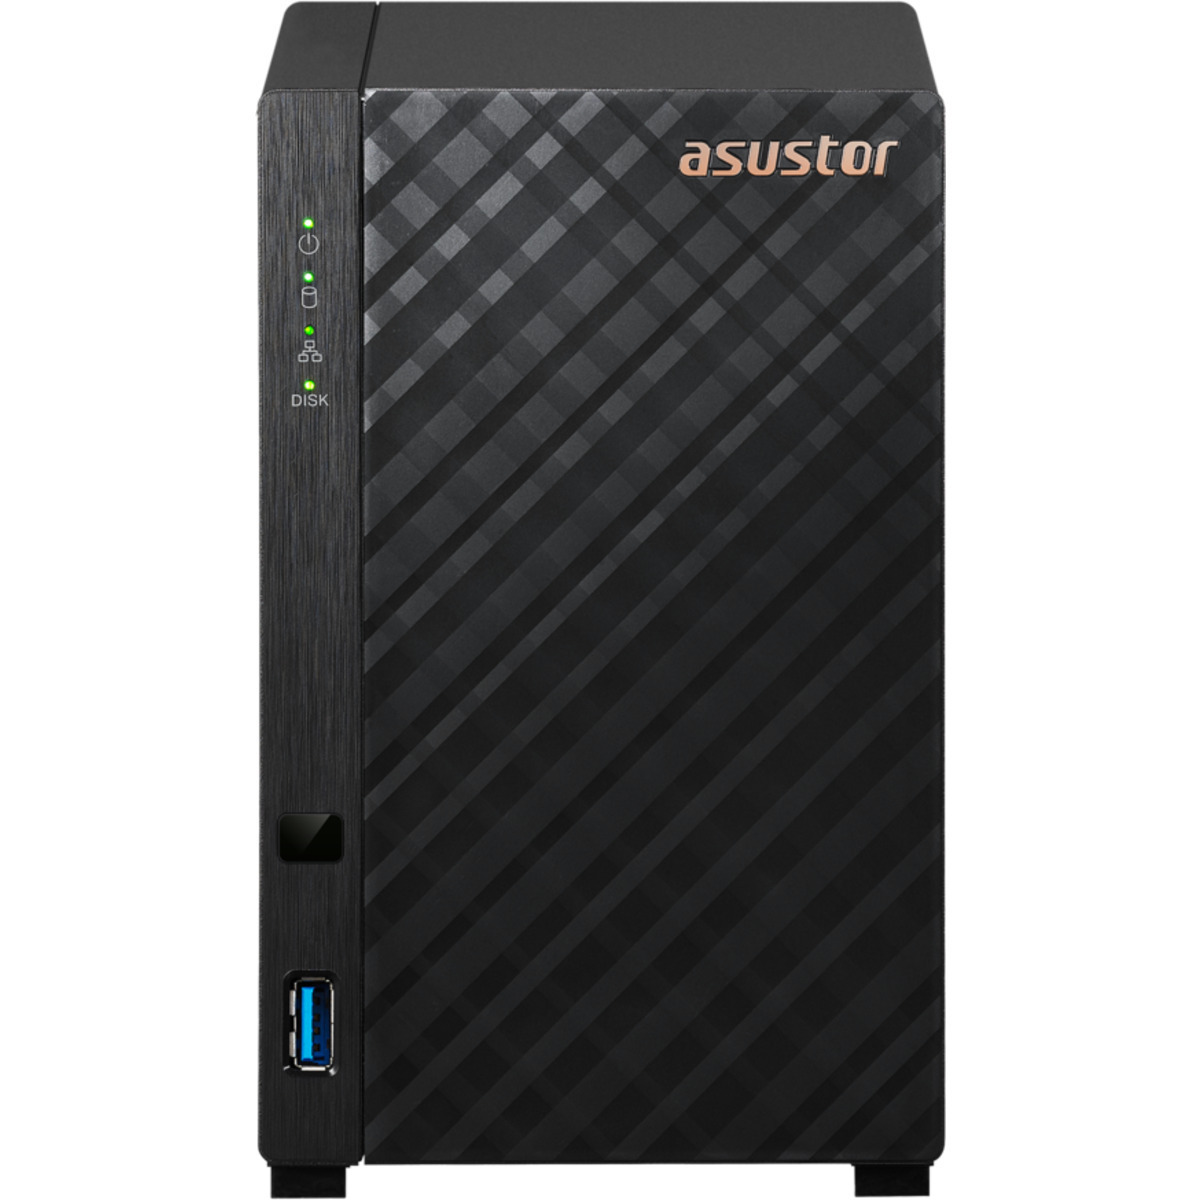 ASUSTOR DRIVESTOR 2 Lite AS1102TL 48tb 2-Bay Desktop Personal / Basic Home / Small Office NAS - Network Attached Storage Device 2x24tb Seagate EXOS X24 ST24000NM002H 3.5 7200rpm SATA 6Gb/s HDD ENTERPRISE Class Drives Installed - Burn-In Tested DRIVESTOR 2 Lite AS1102TL